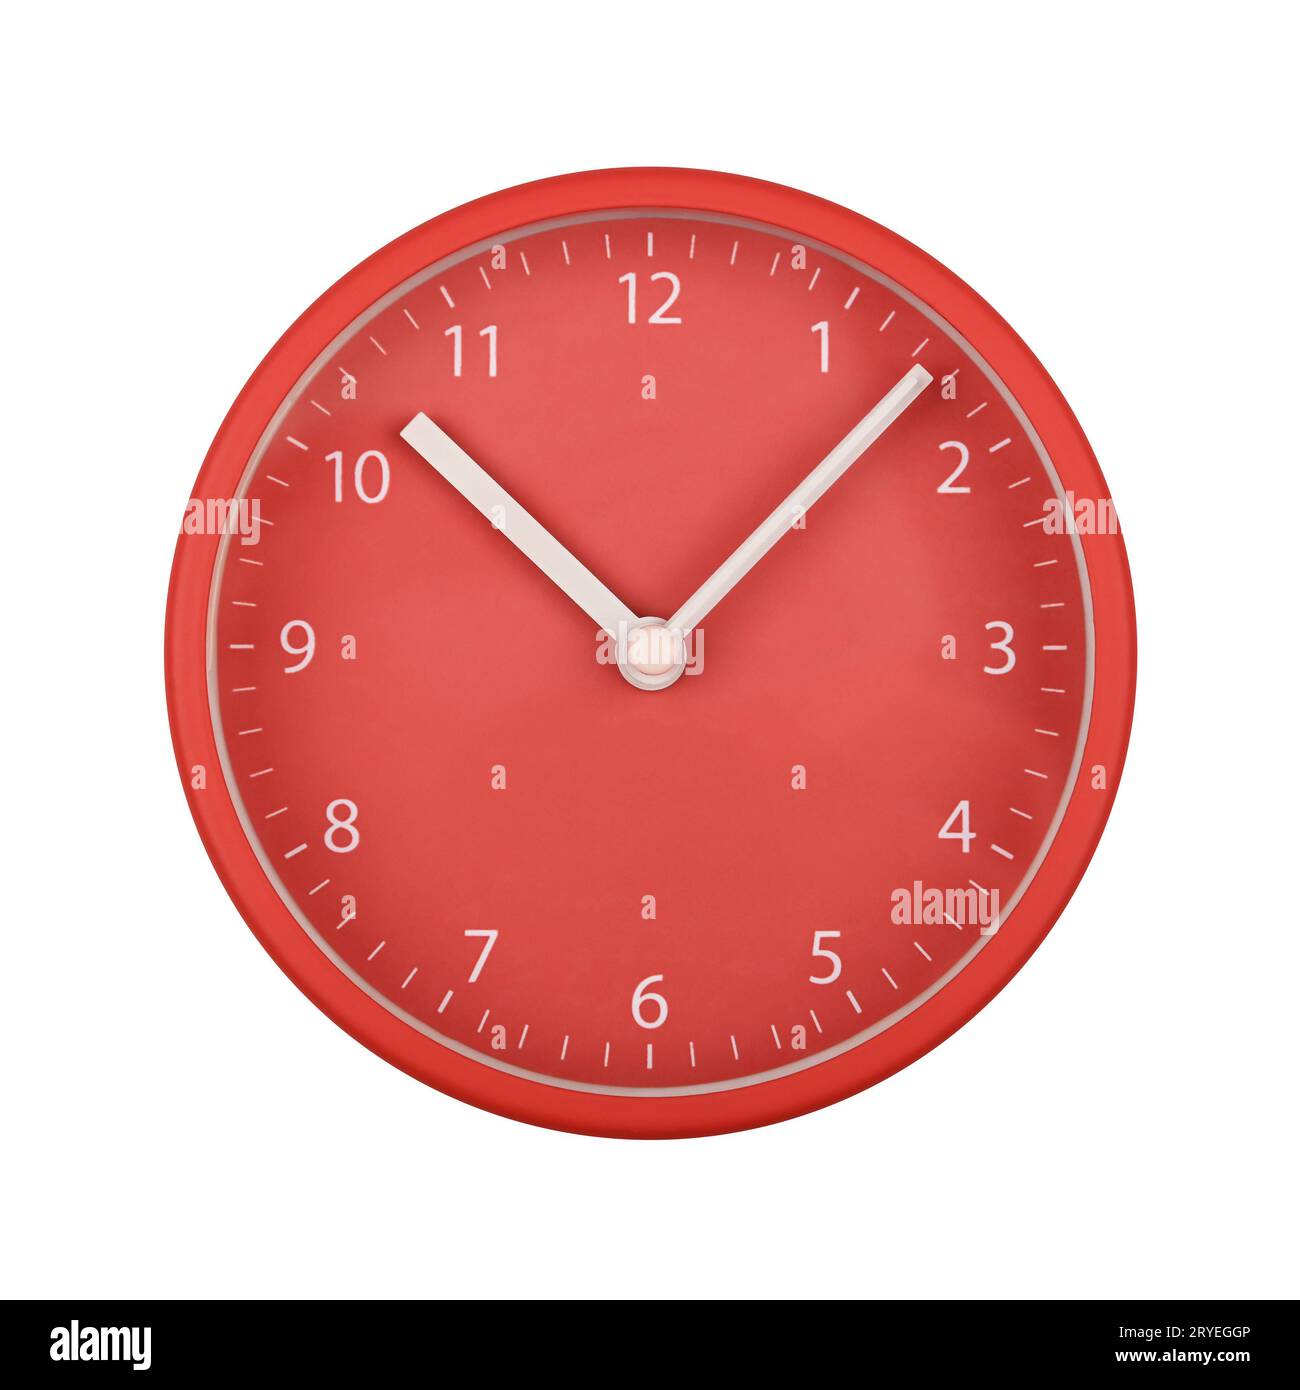 Red wall clock face isolated on white Stock Photo